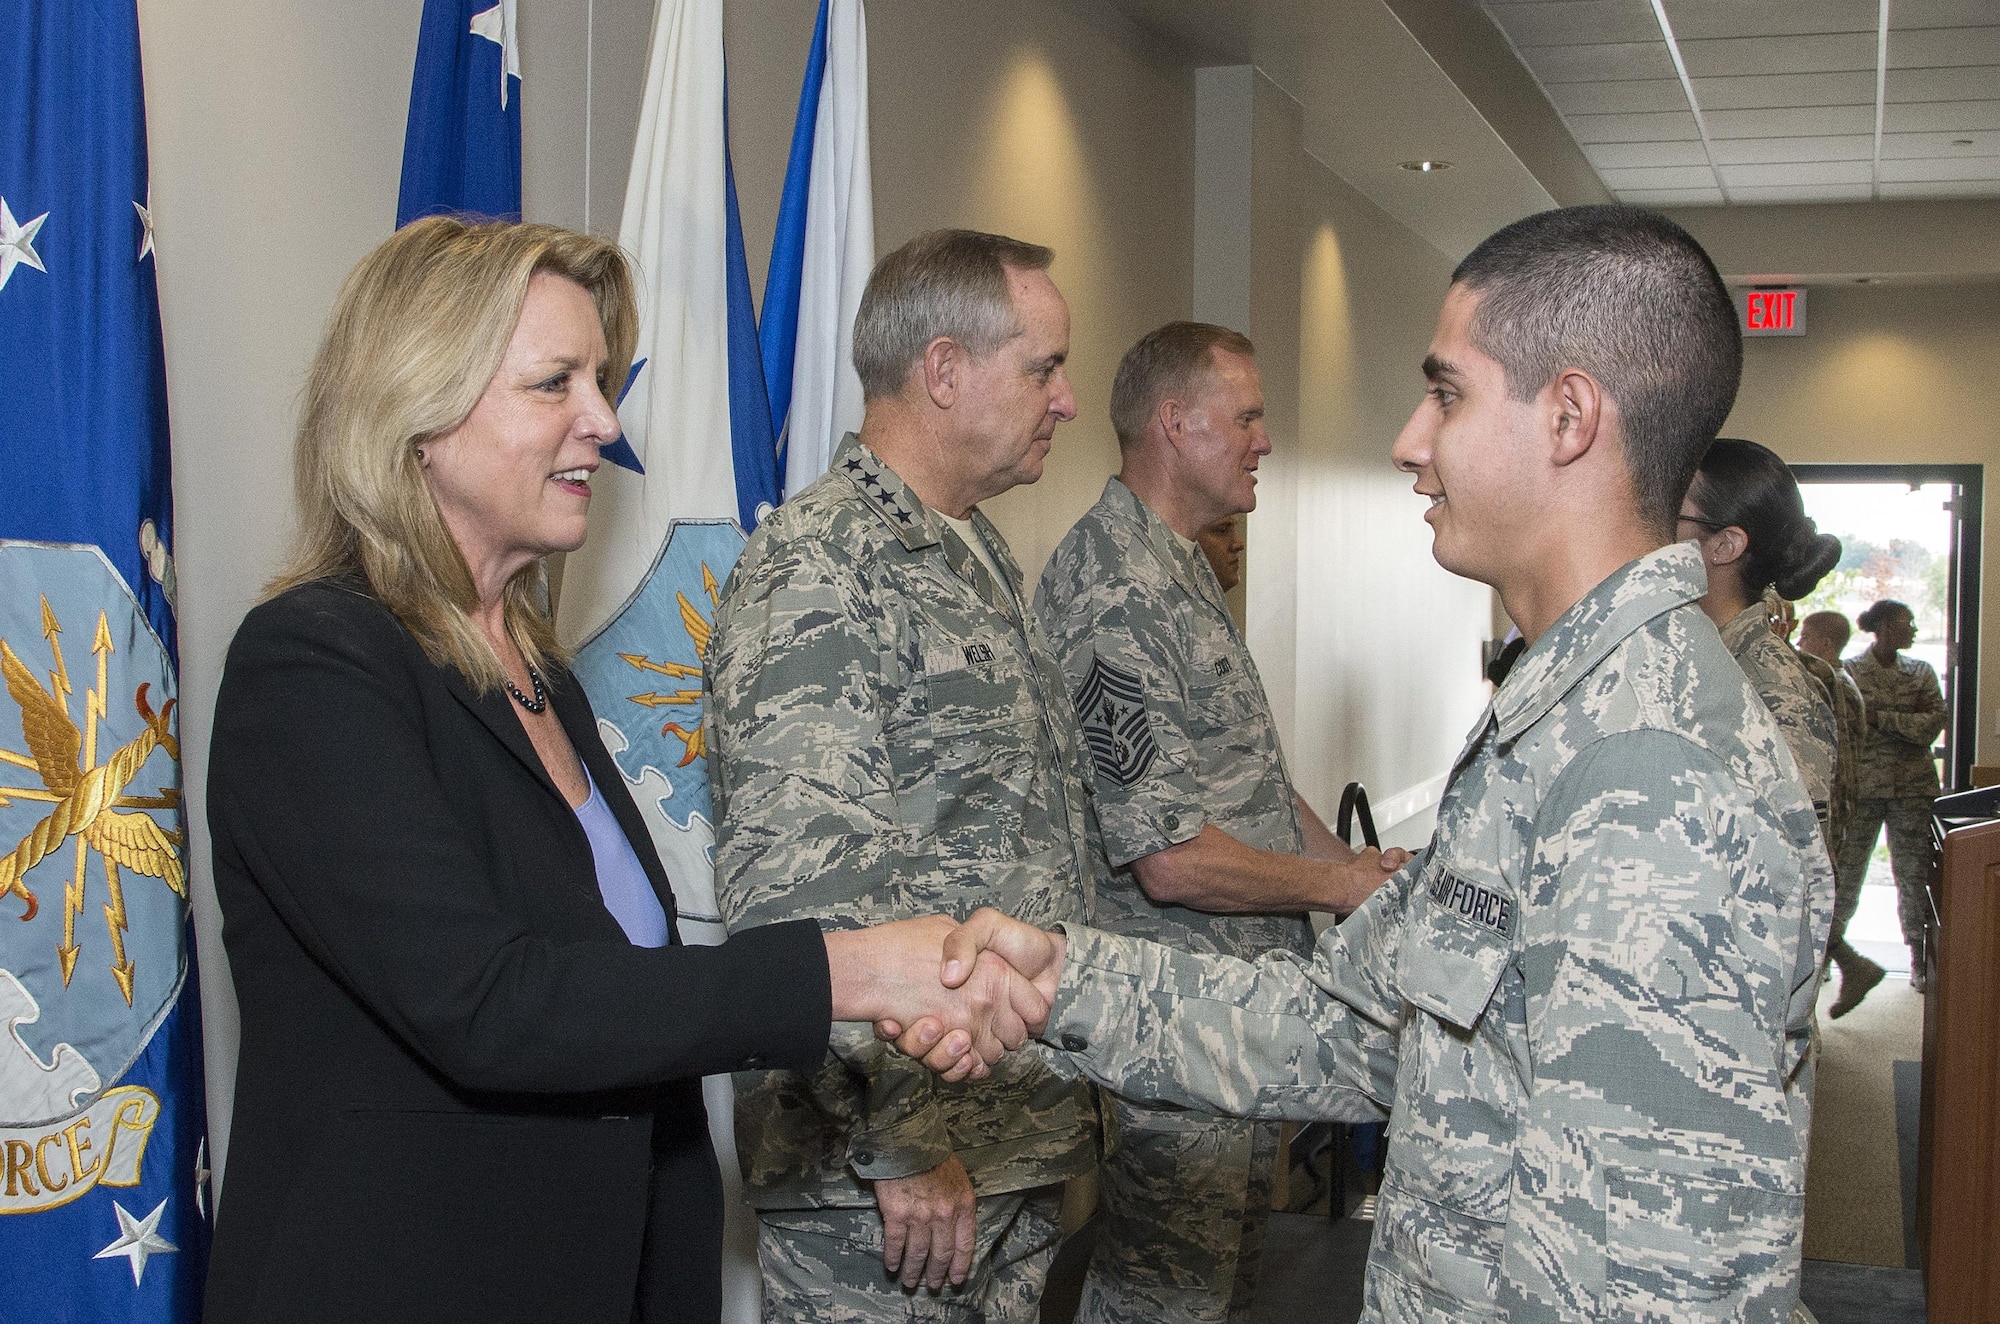 Secretary of the Air Force Deborah Lee James, Air Force Chief of Staff General Mark A. Welsh III and Chief Master Sergeant of the Air Force James A. Cody congratulate Airmen who will soon complete Airmen’s Week Aug. 27, 2015, at Joint Base San Antonio-Lackland’s Pfingston Reception Center. The Airmen received a copy of "America's Air Force: A Profession of Arms," the next evolution of the "Little Blue Book" previously released in 1997. The new book gives Airmen instant access to the core values, codes and creeds that guide Airmen as they serve in the Profession of Arms. The book will be distributed to all new Airmen before transitioning to technical training and available online through Air Force e-publishing.